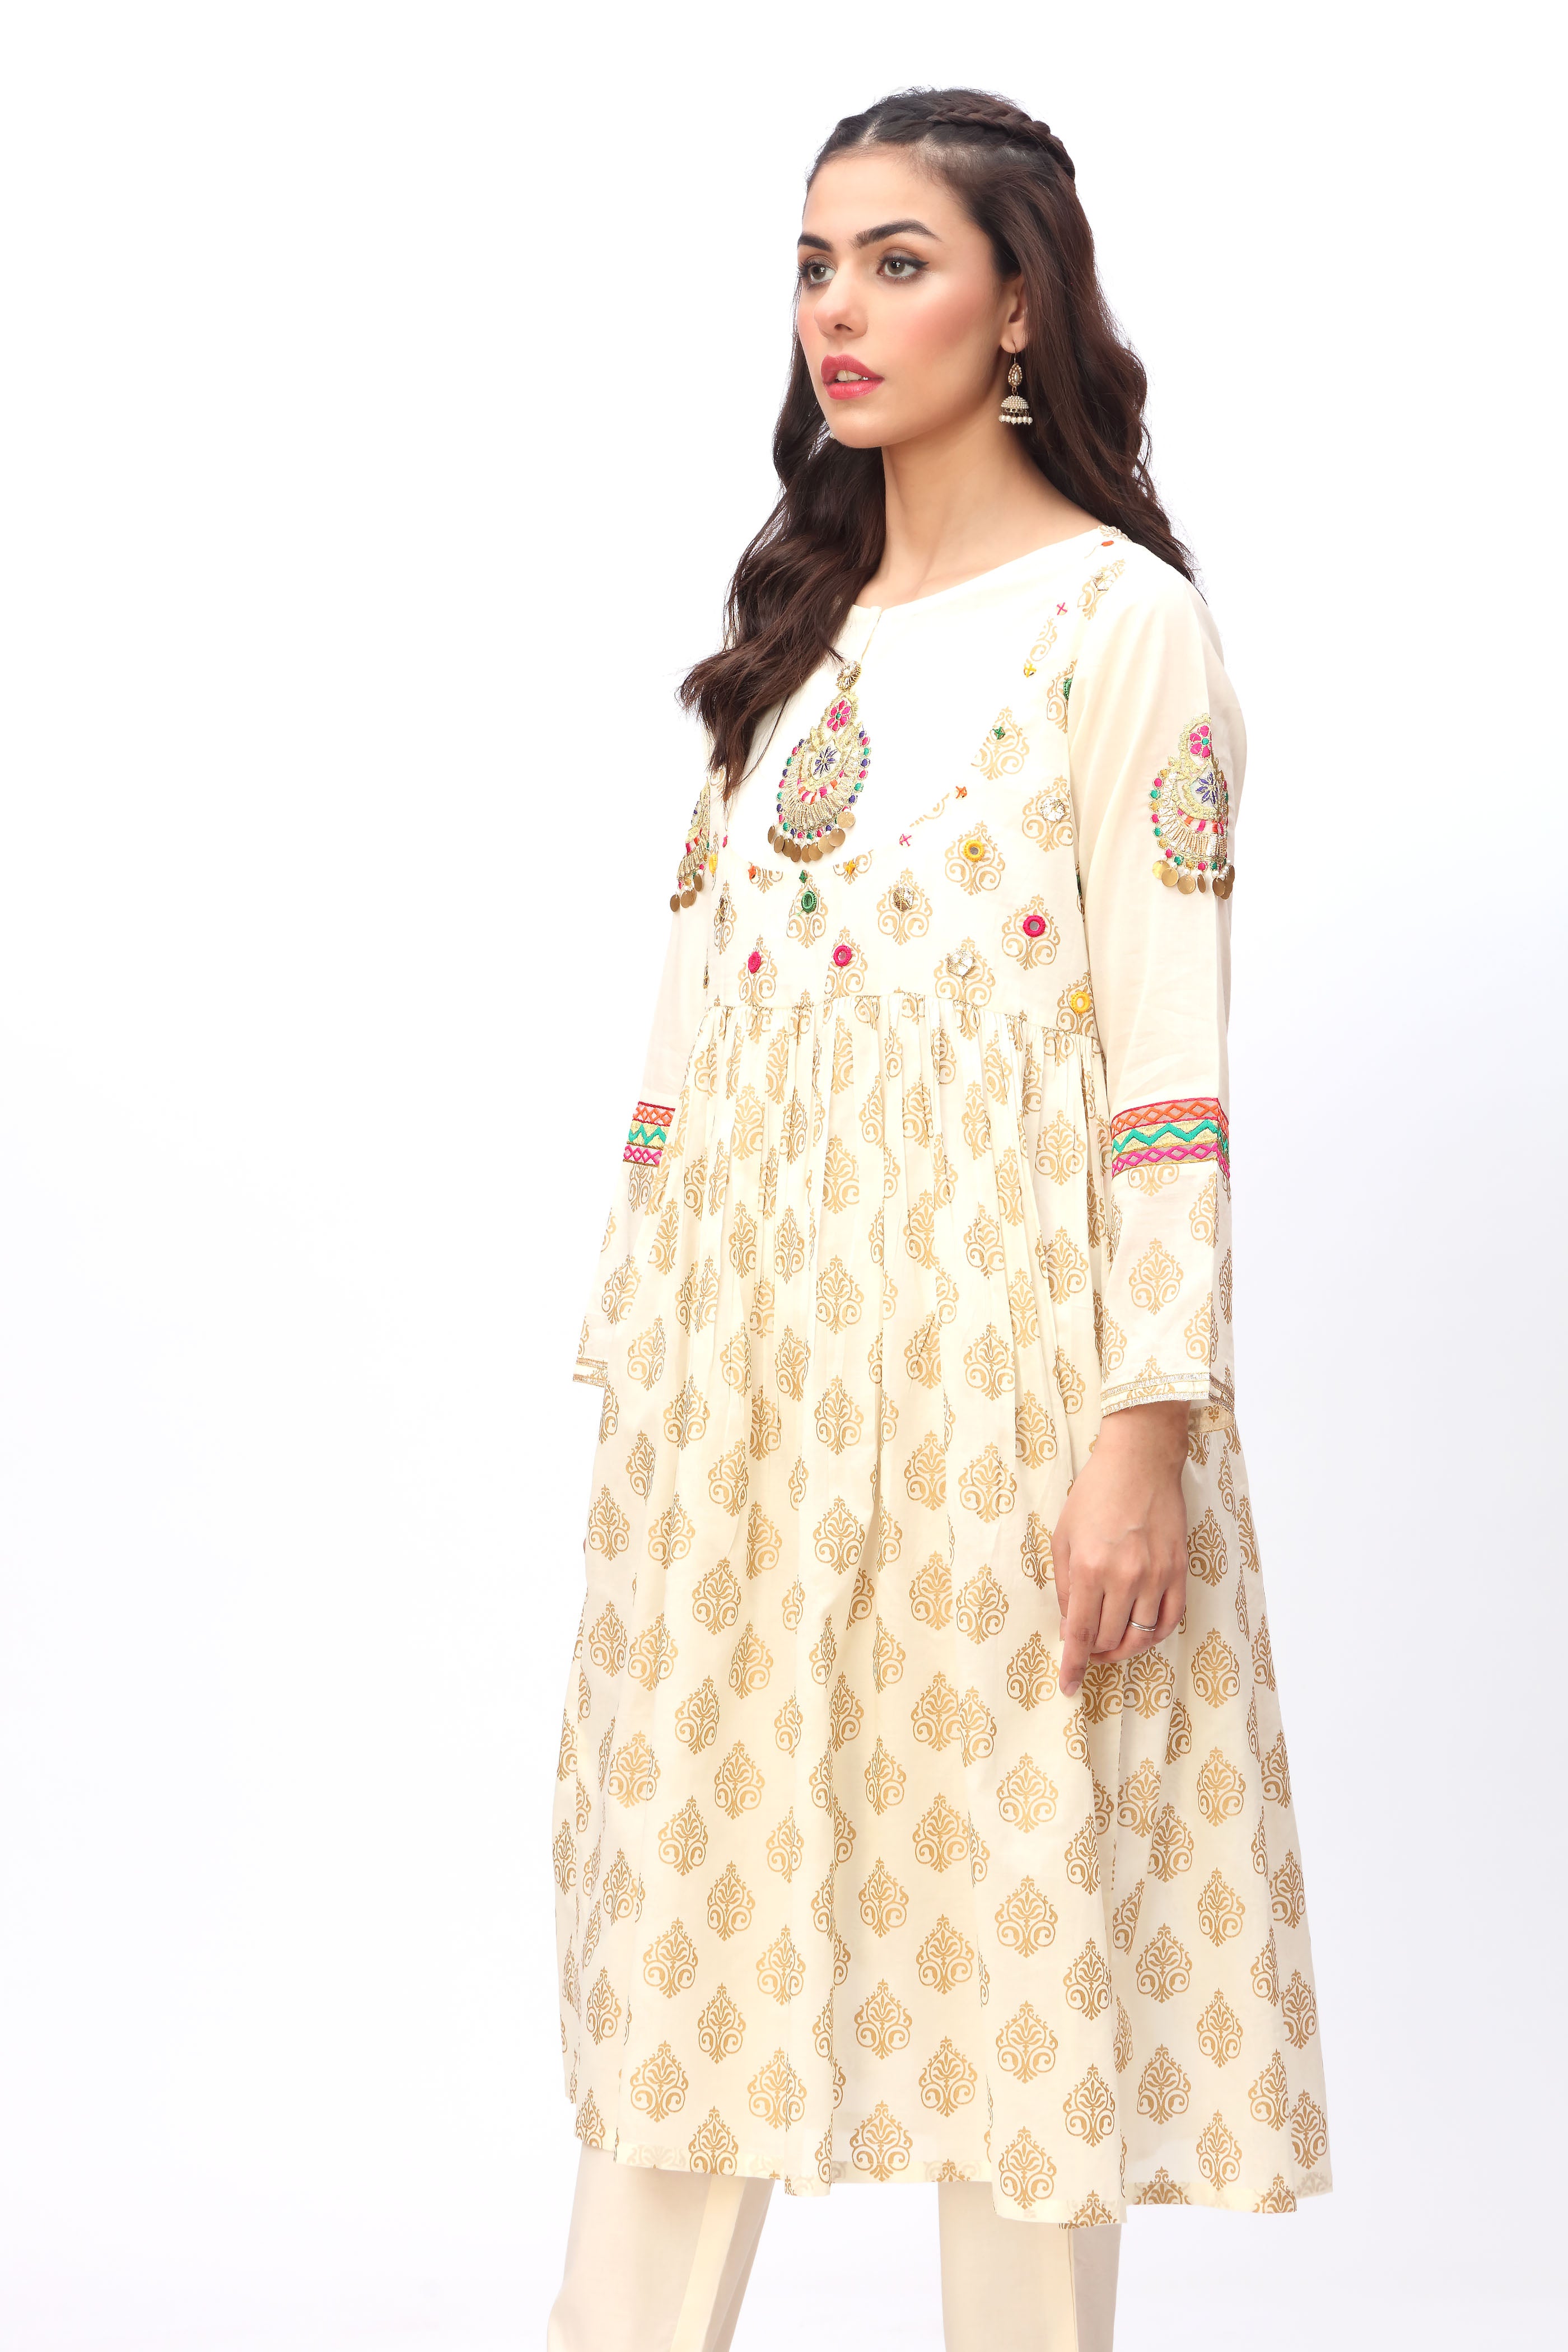 Gold Grid 1 in Off White coloured Printed Lawn fabric 2